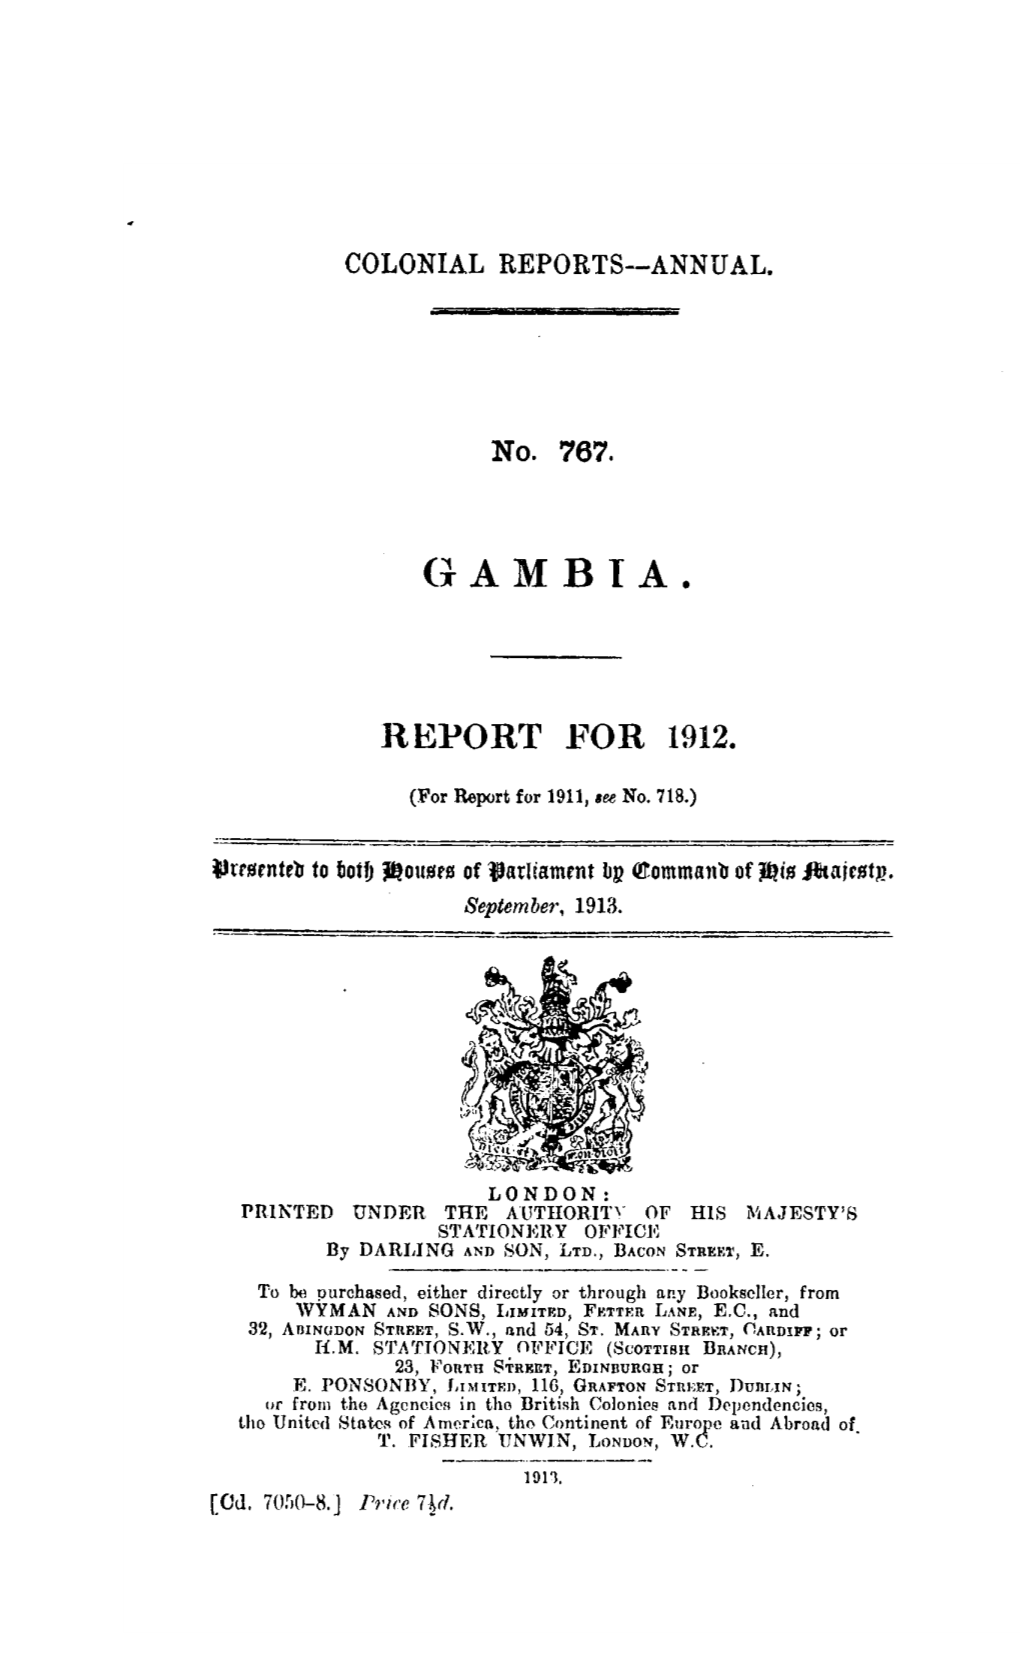 Annual Report of the Colonies. Gambia 1912